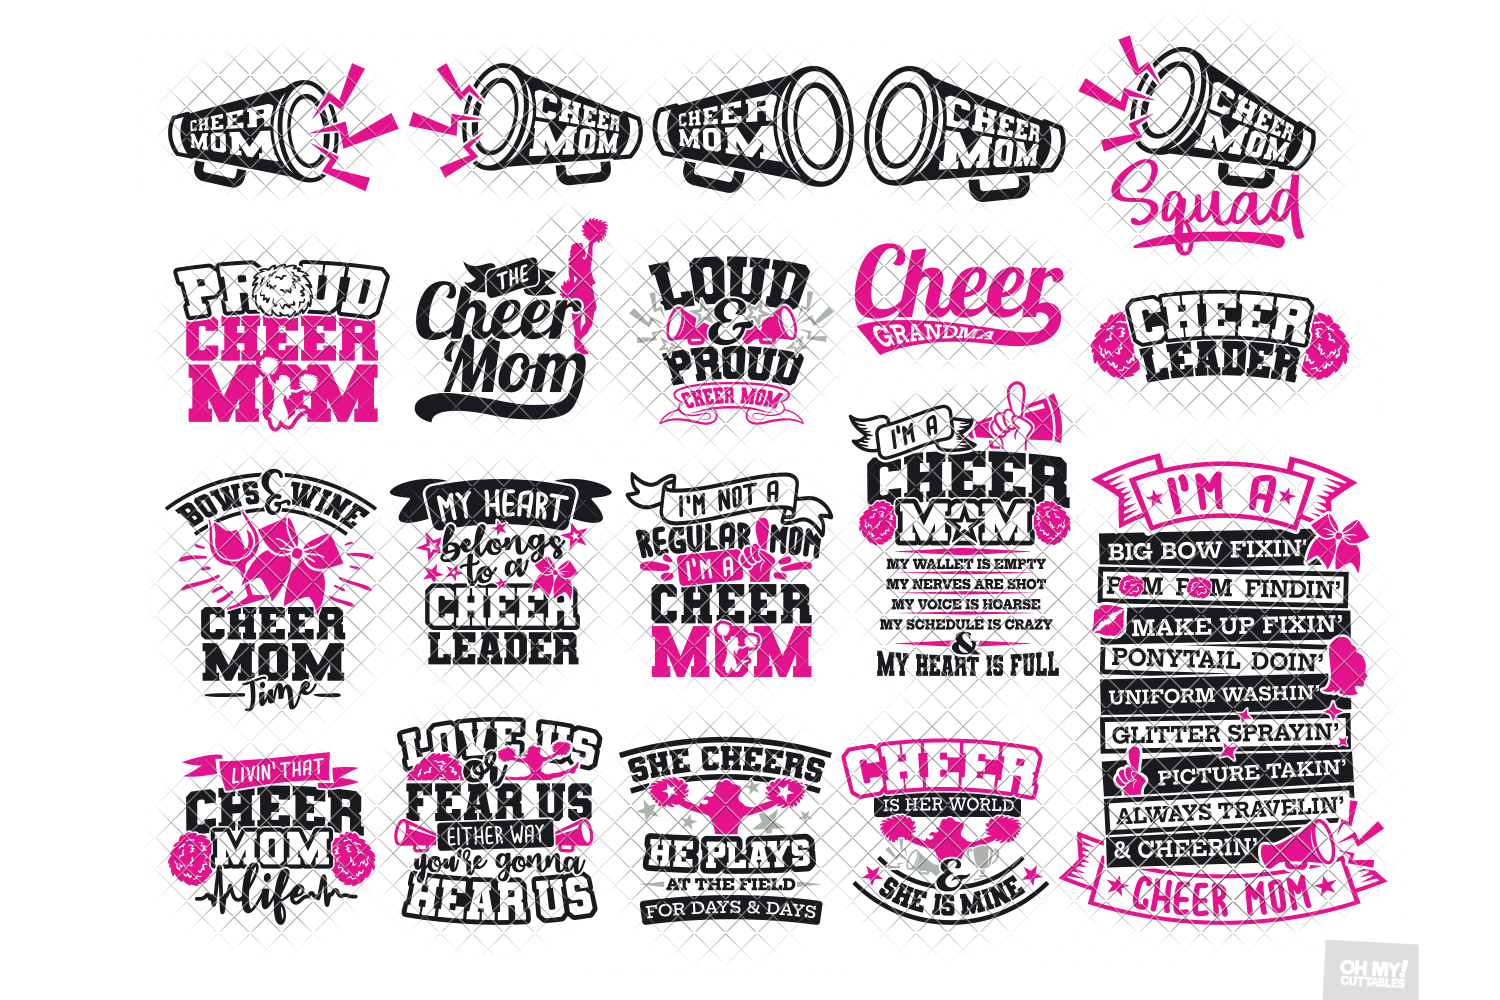 Cheer Mom SVG in SVG, DXF, PNG, EPS, JPG for Silhouette.